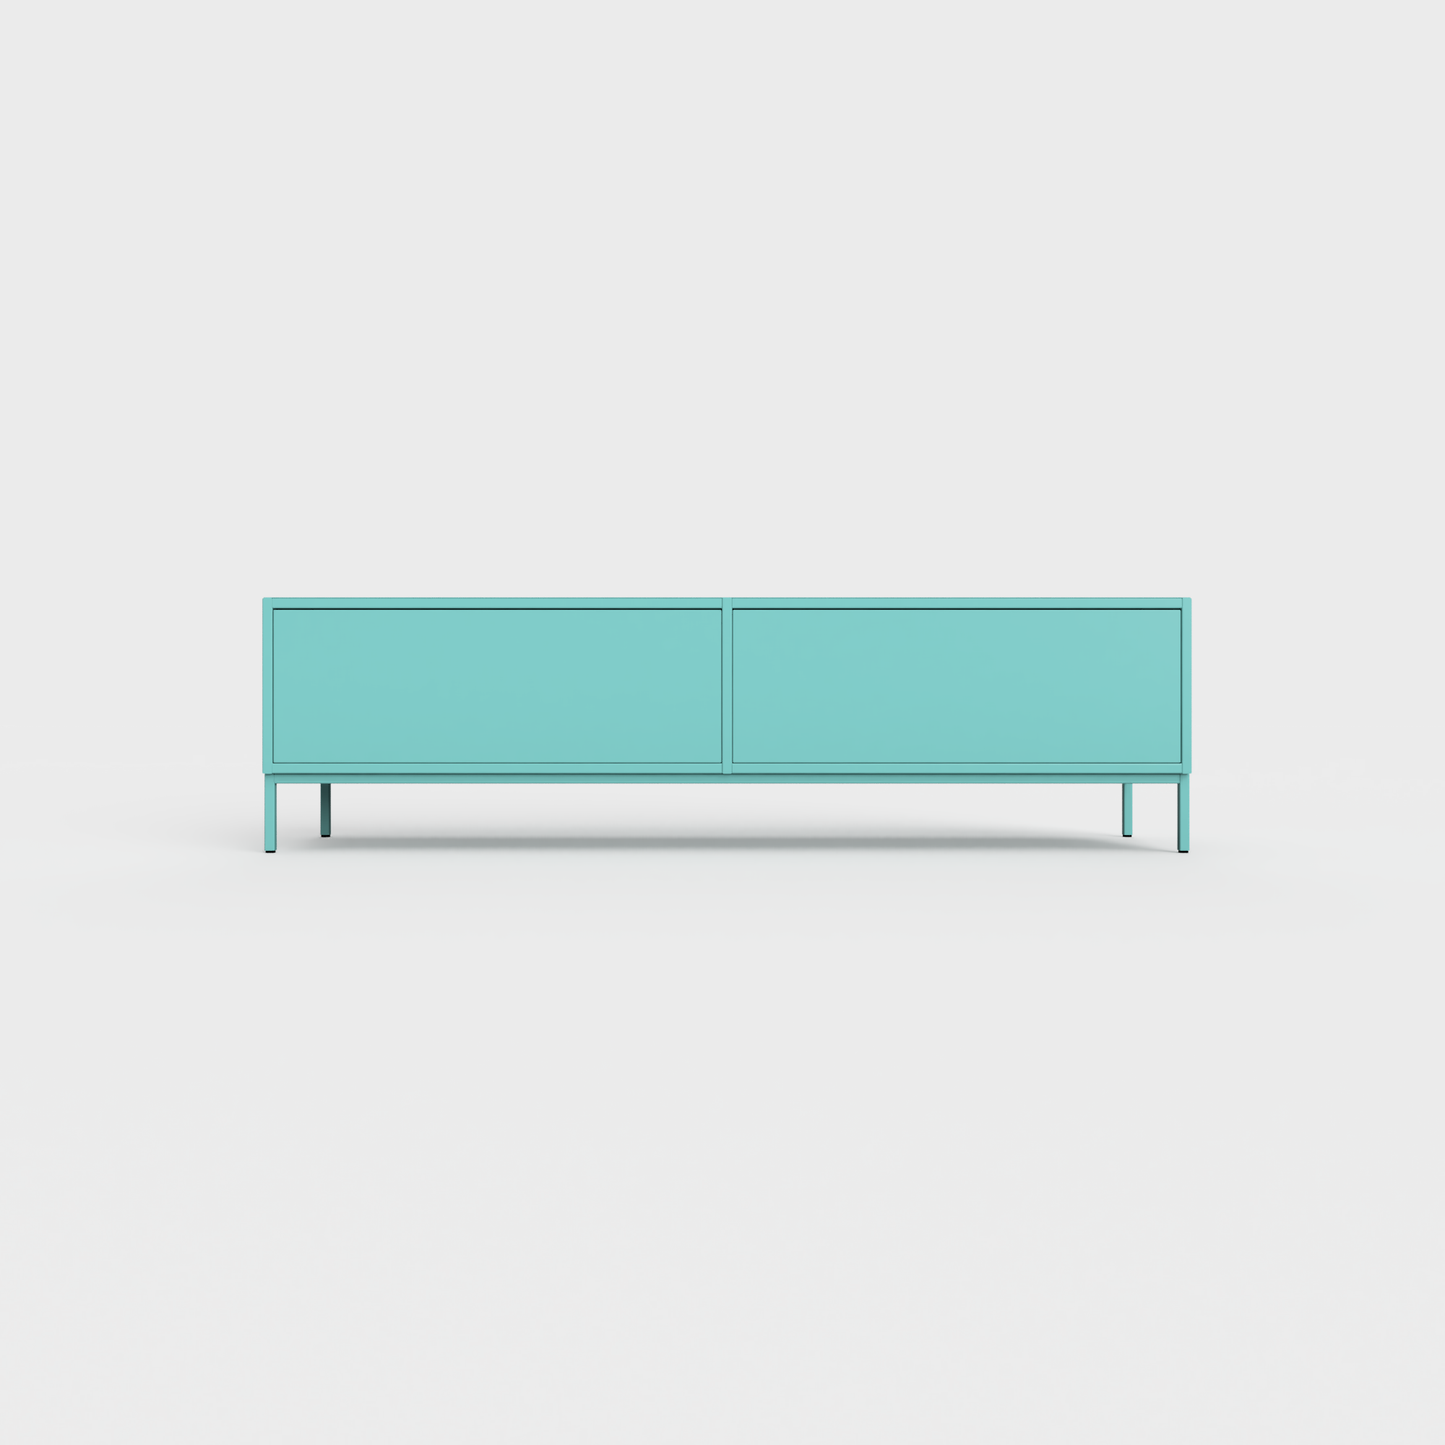 Prunus 01 Lowboard in Forget me not color, powder-coated steel, elegant and modern piece of furniture for your living room